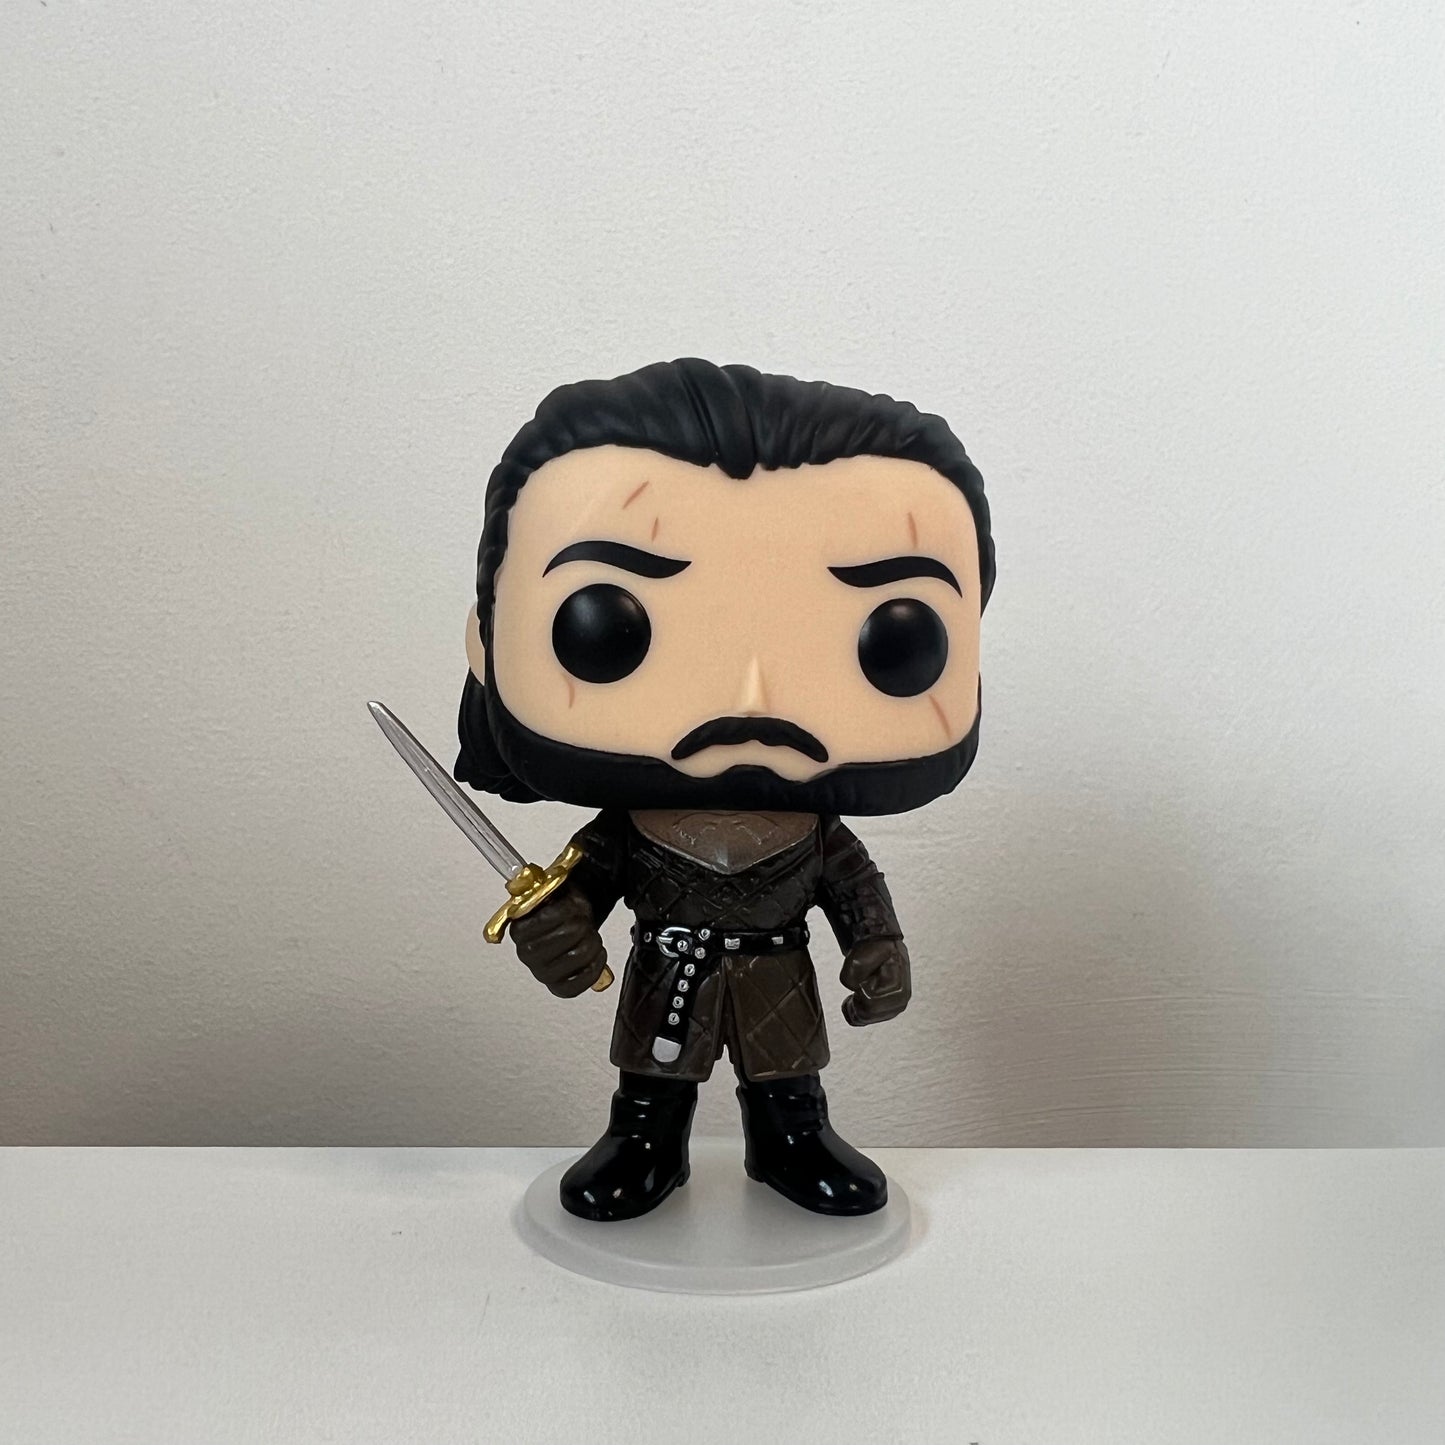 Game of Thrones Funkoverse - Jon Snow Funko Pop (From Funkoverse Board Game)